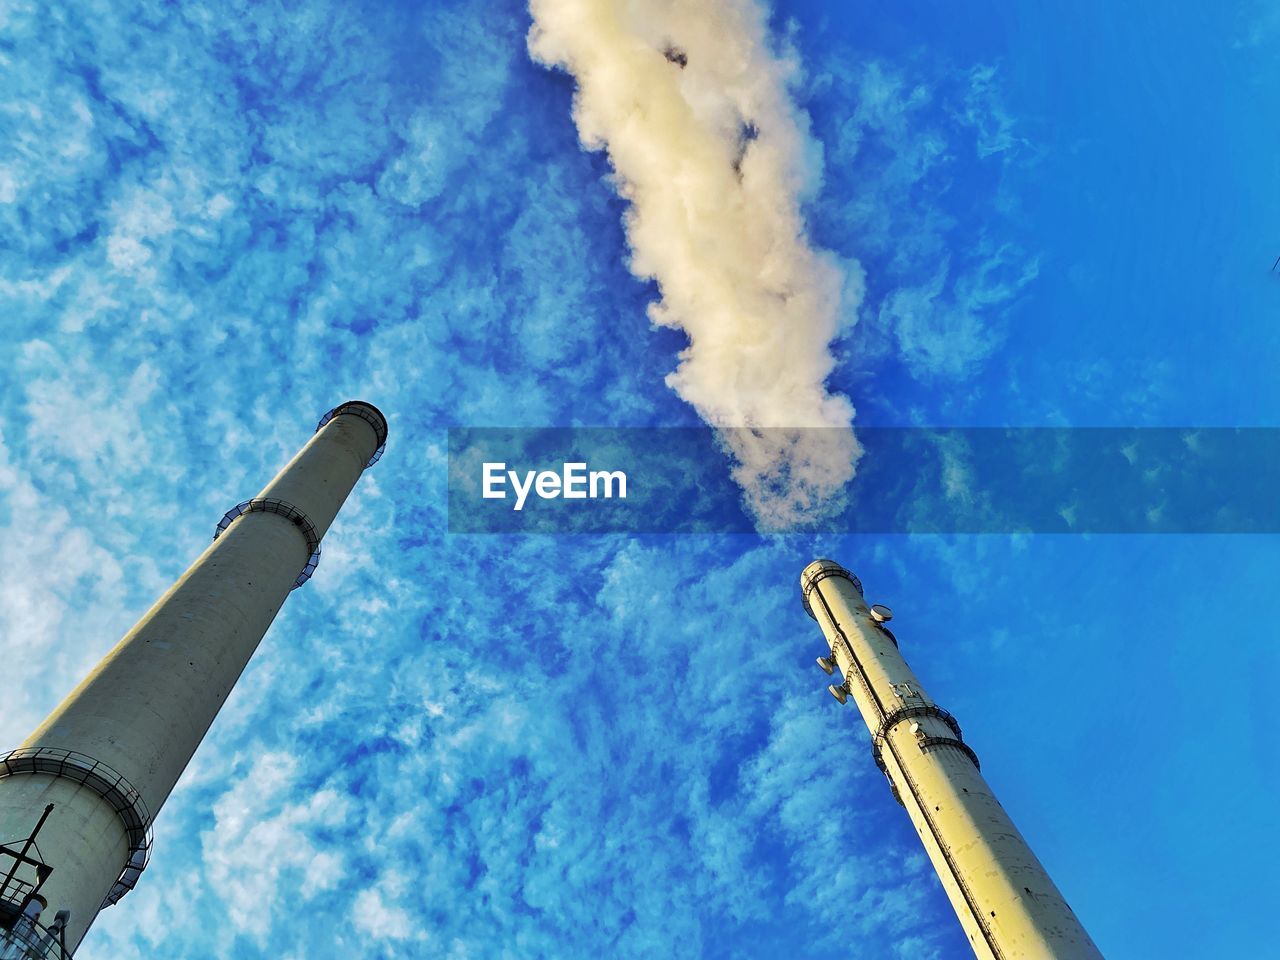 blue, sky, cloud, low angle view, rocket, spacecraft, no people, smoke stack, smoke, vehicle, nature, missile, day, architecture, outdoors, industry, pollution, factory, weapon, air pollution